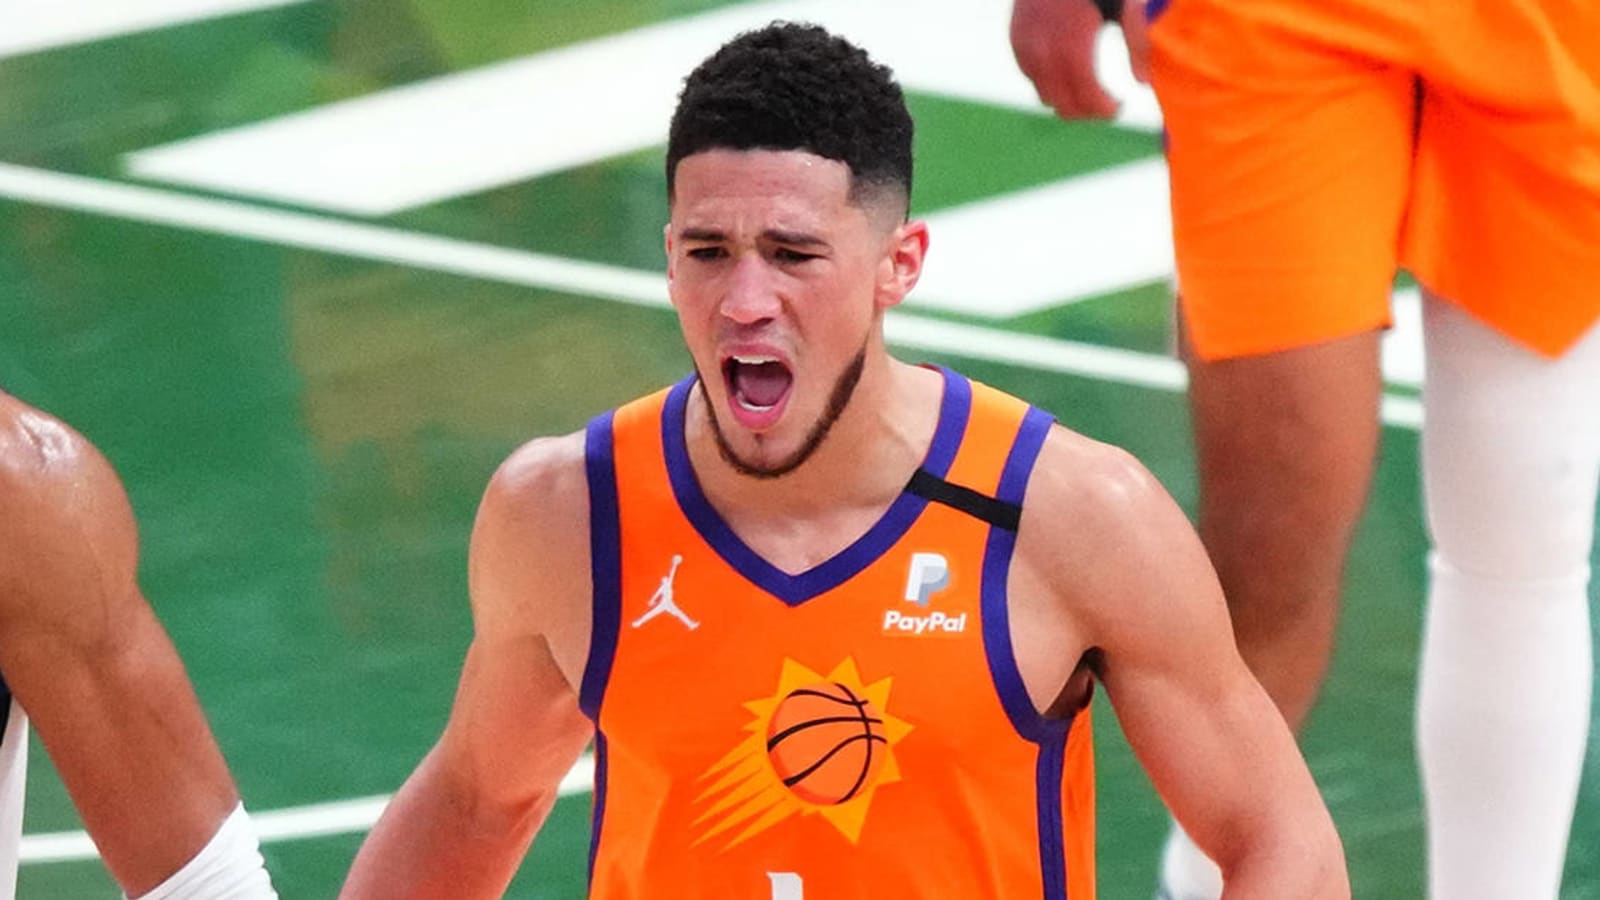 Refs badly miss foul call on Devin Booker late in Game 4